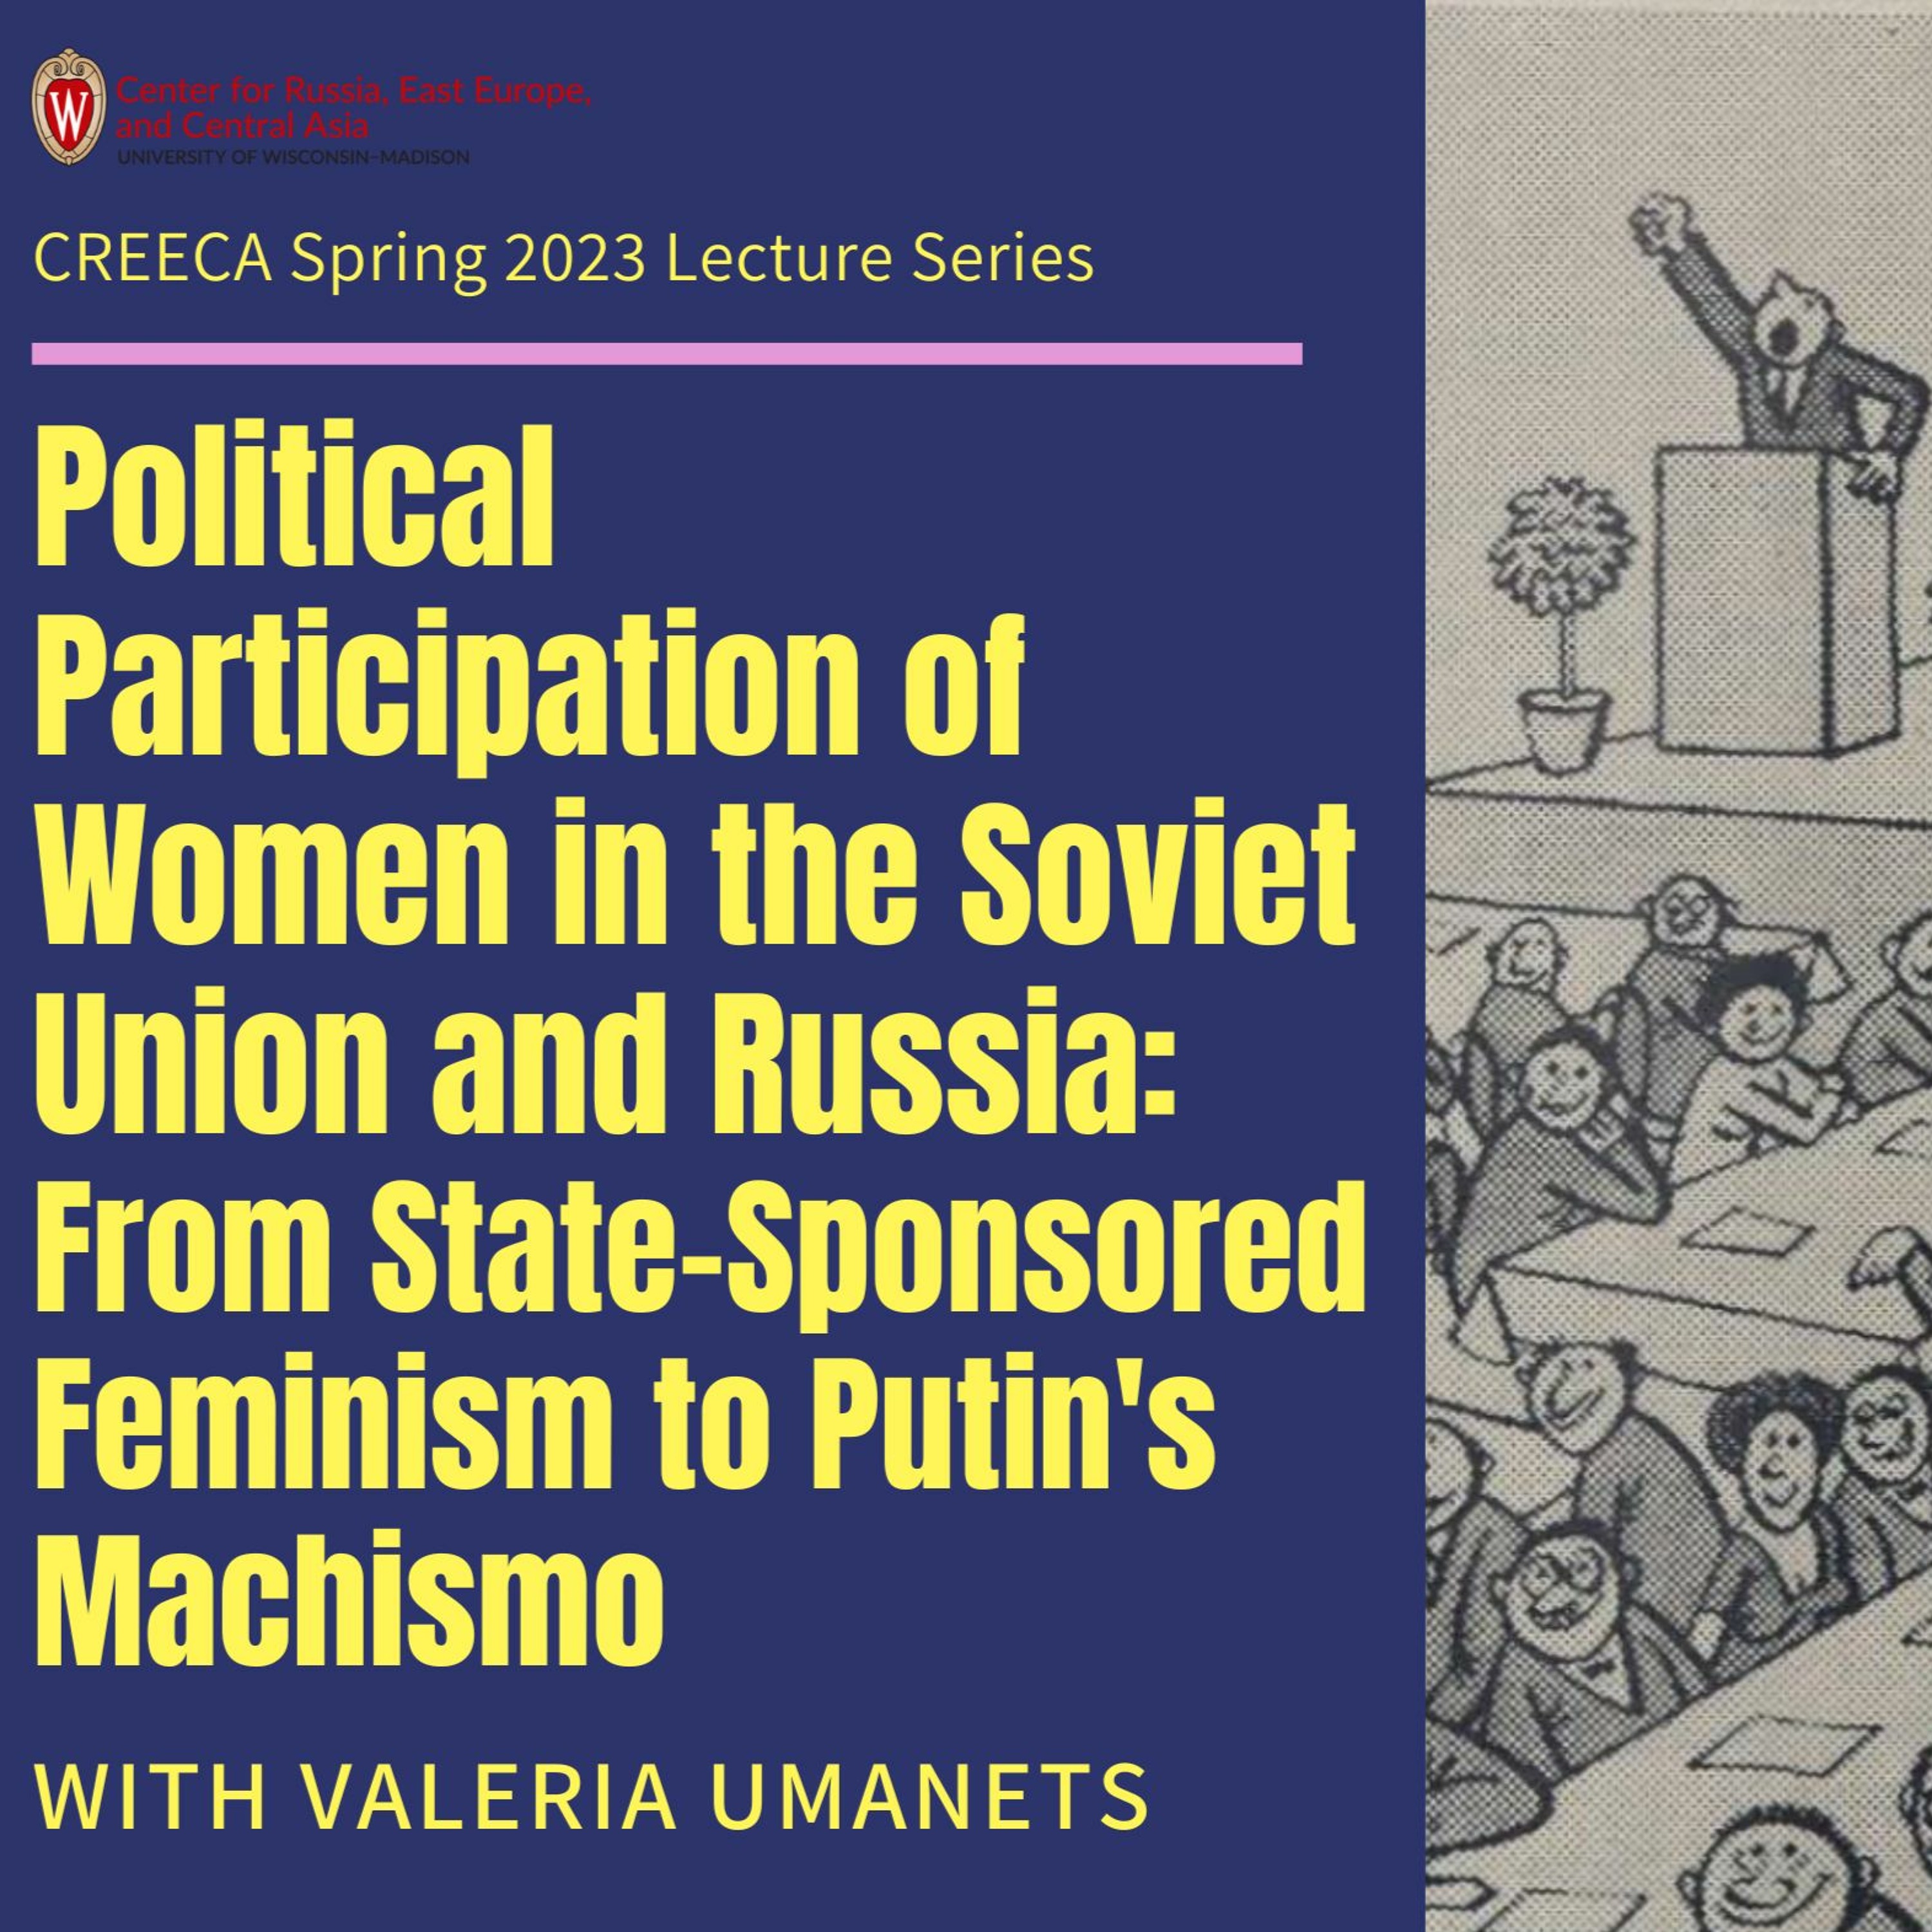 Political Participation of Women in the USSR and Russia with Valeria Umanets